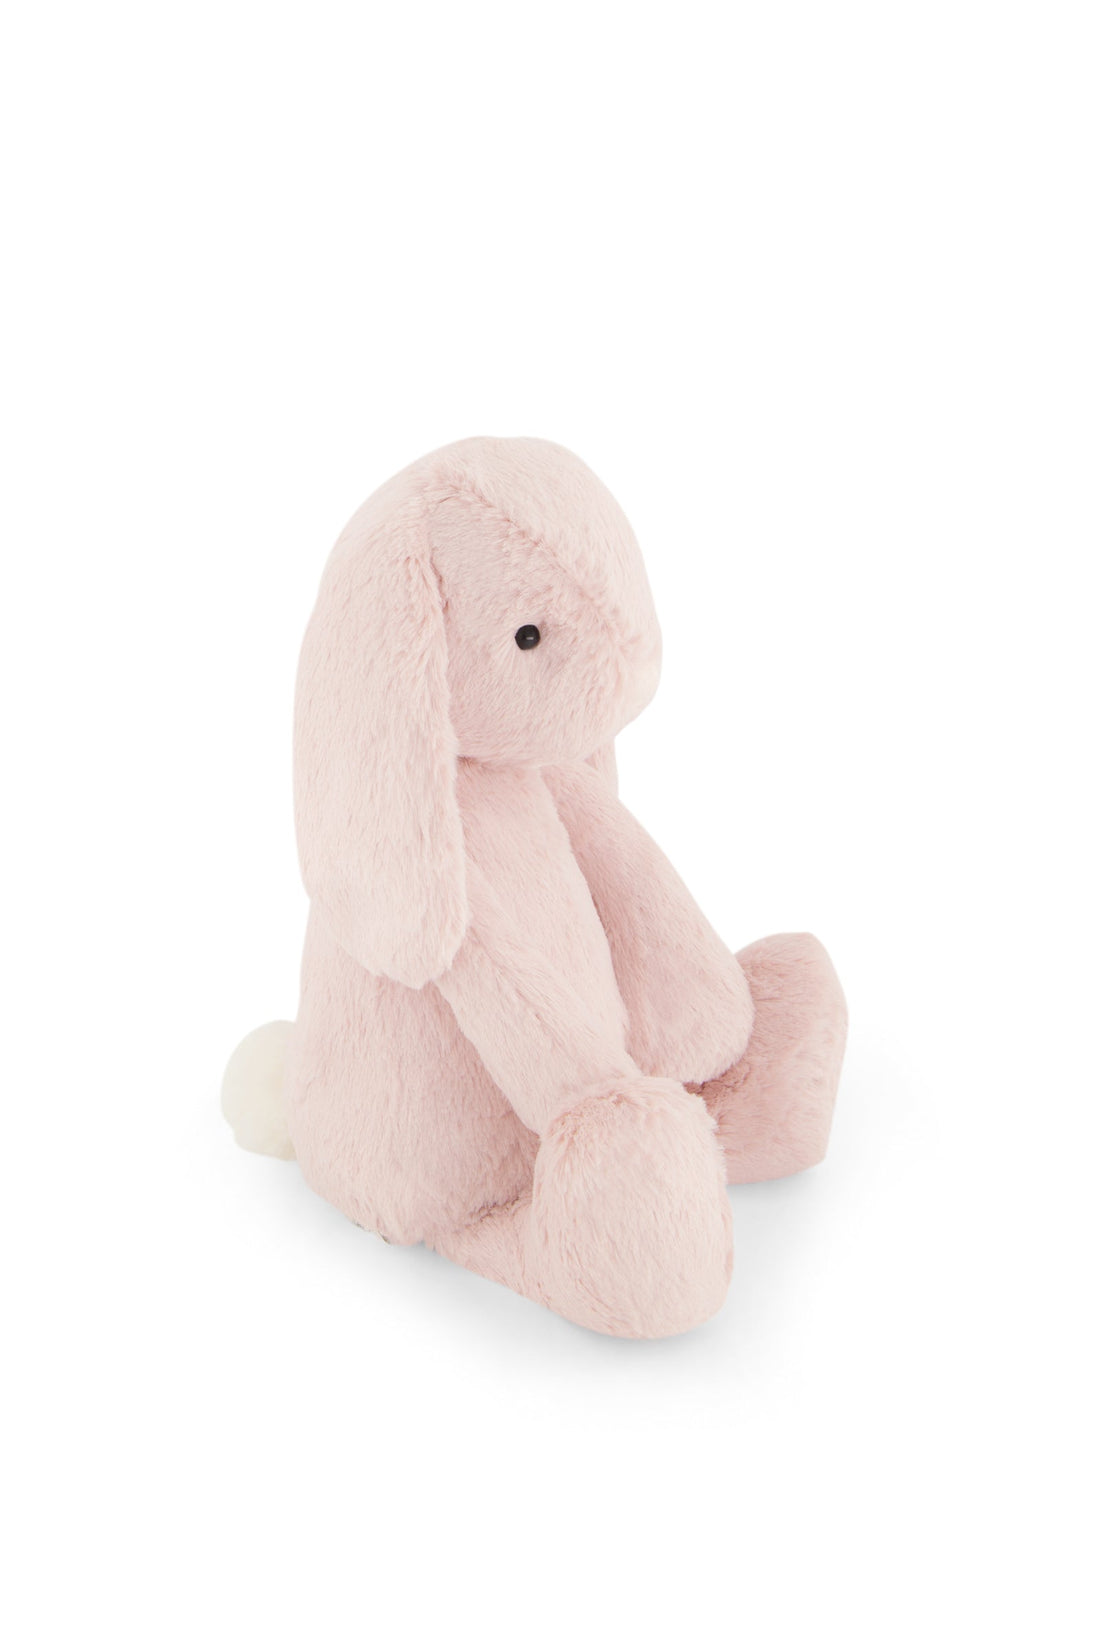 Snuggle Bunnies - Penelope the Bunny - Blush Childrens Toy from Jamie Kay NZ